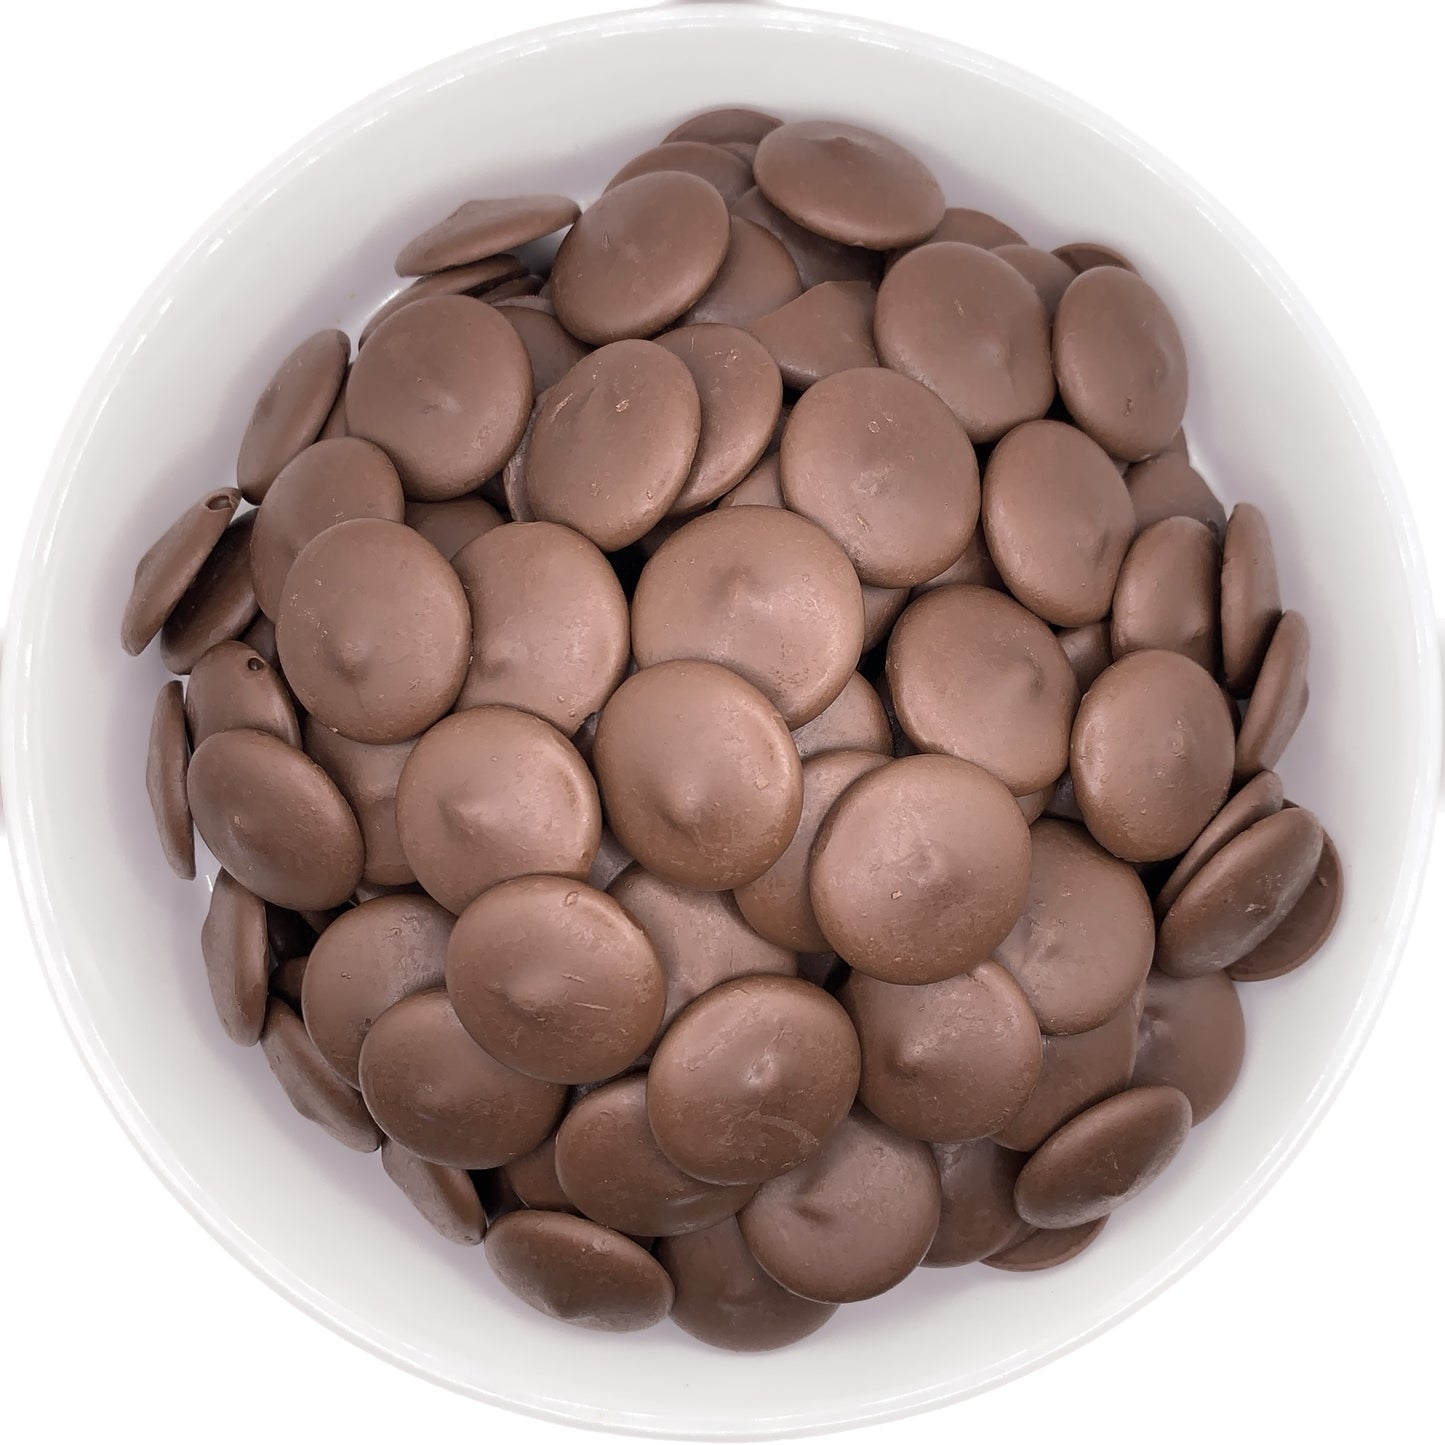 Merkens Cocoa Dark Chocolate Confectionery Melting Wafers contained in a white bowl, highlighting the rich, deep color and smooth finish suitable for gourmet homemade chocolates.